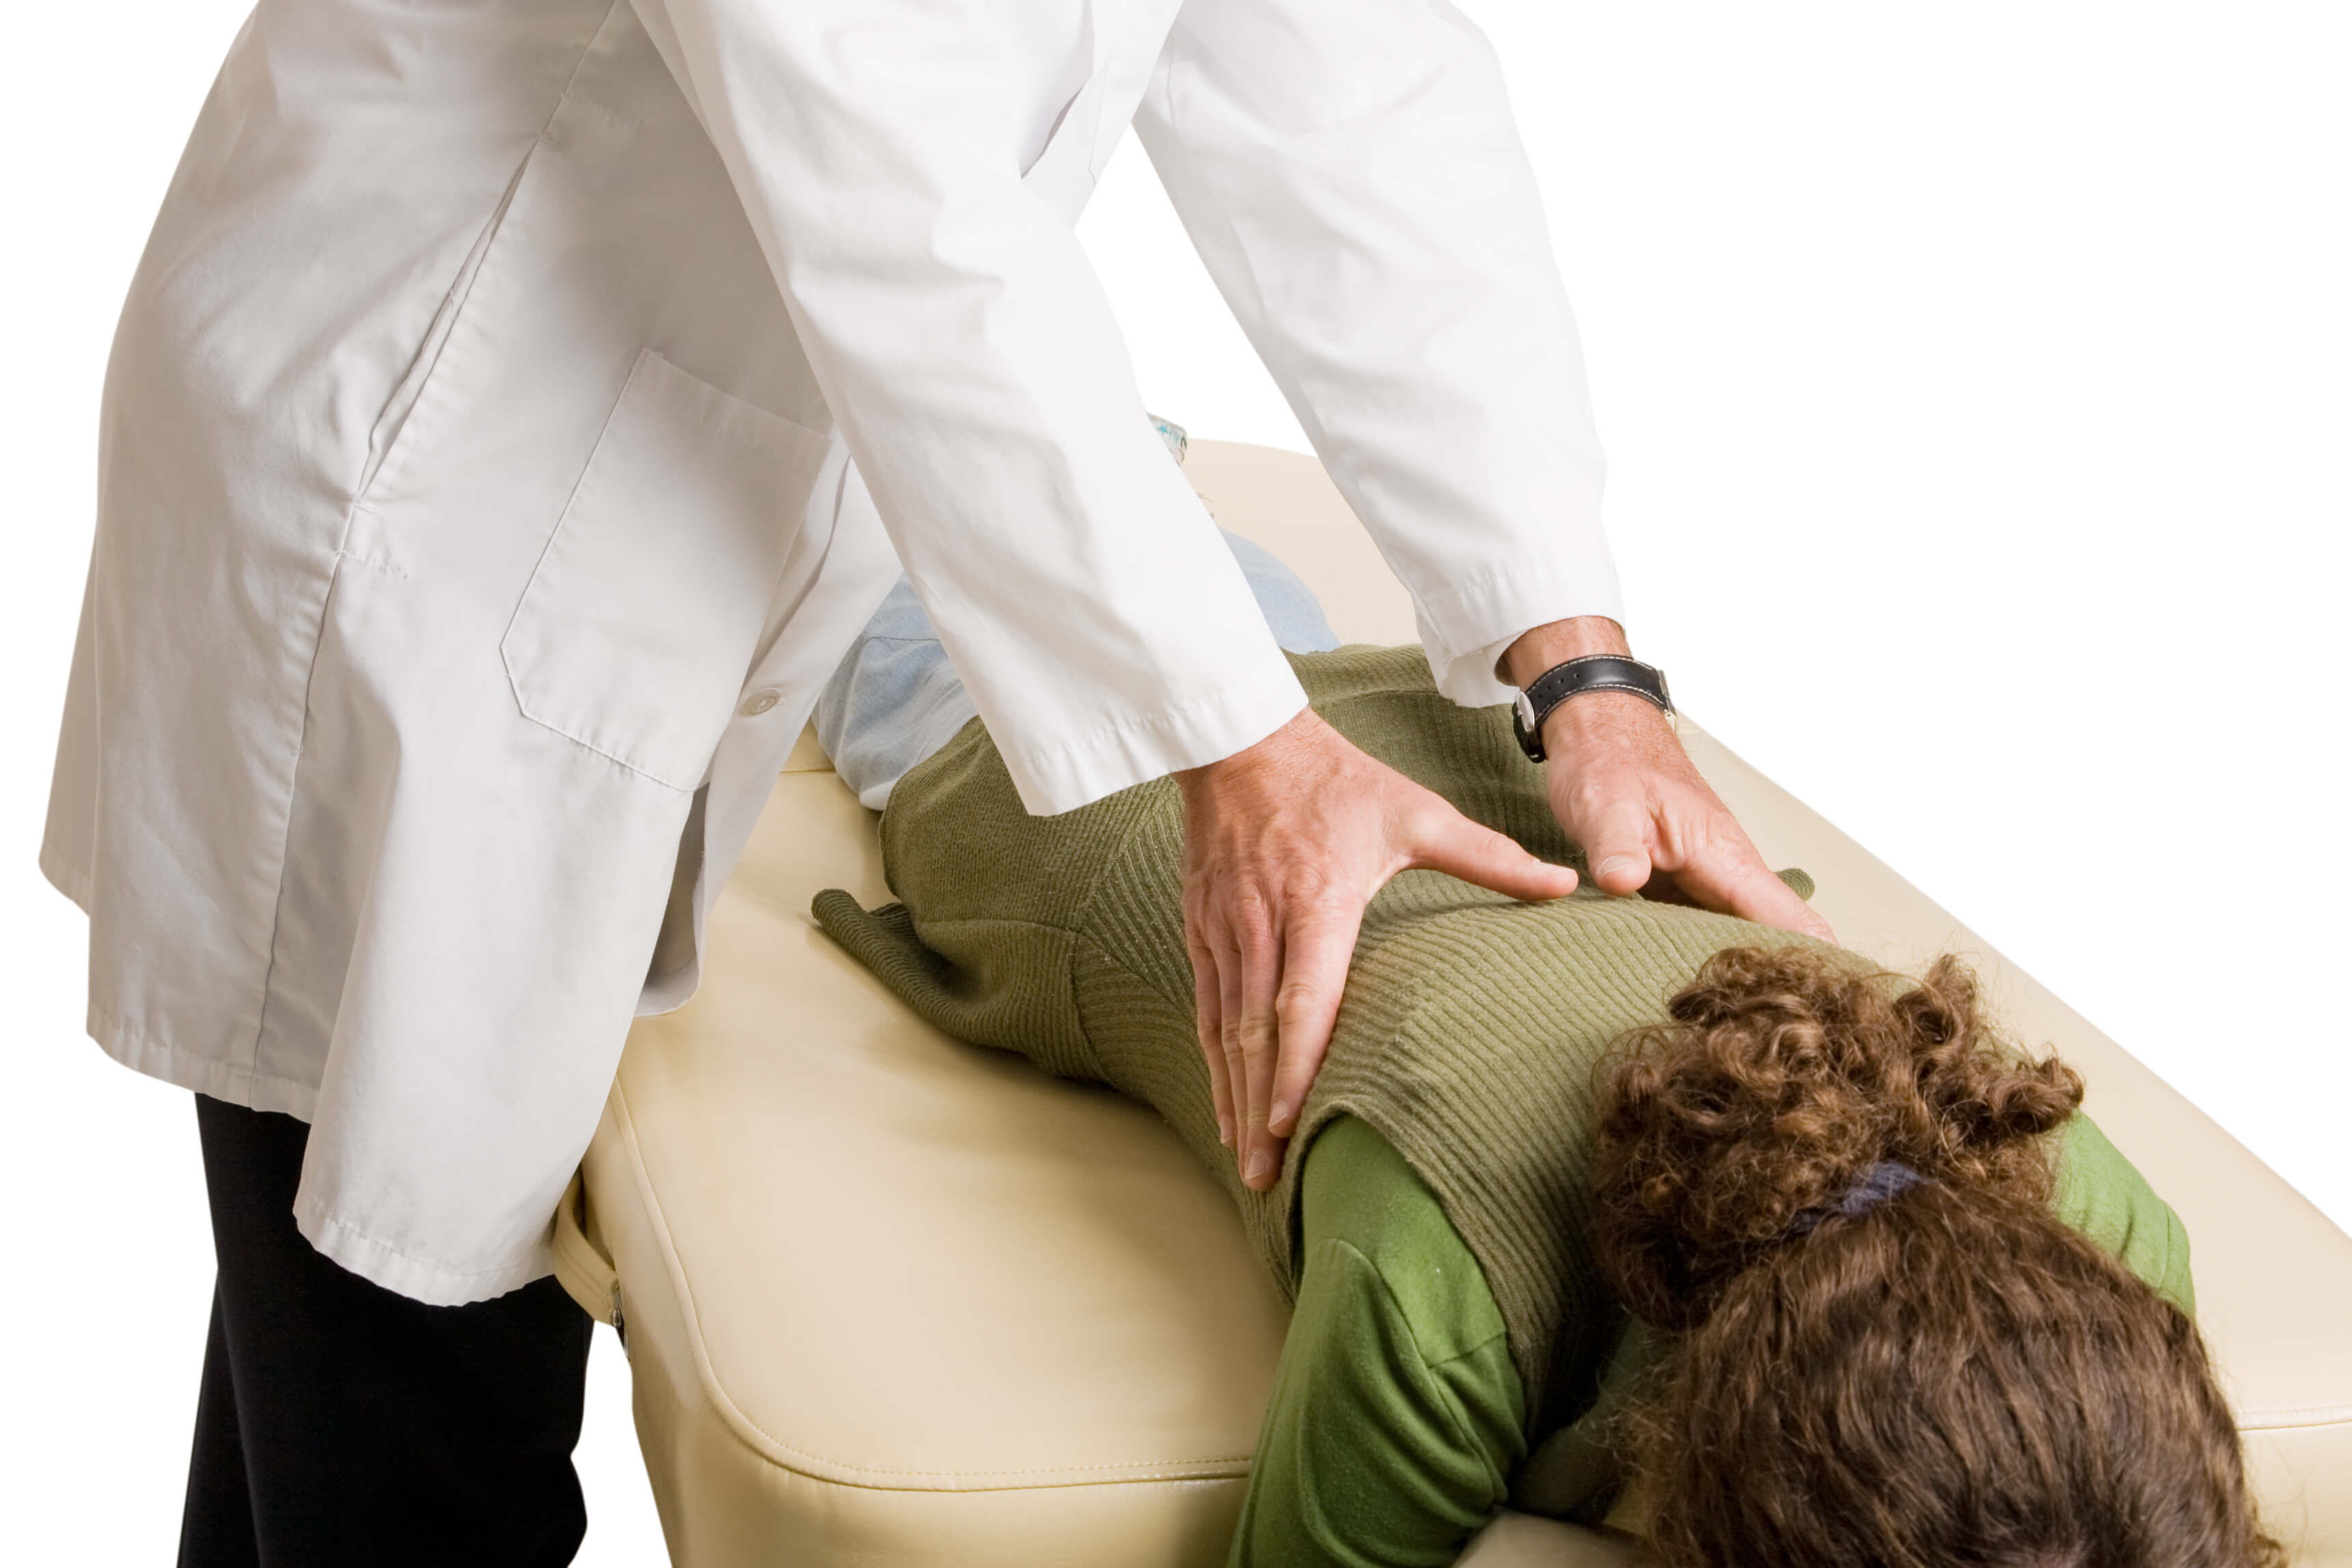 Chiropractor Contract Lawyer